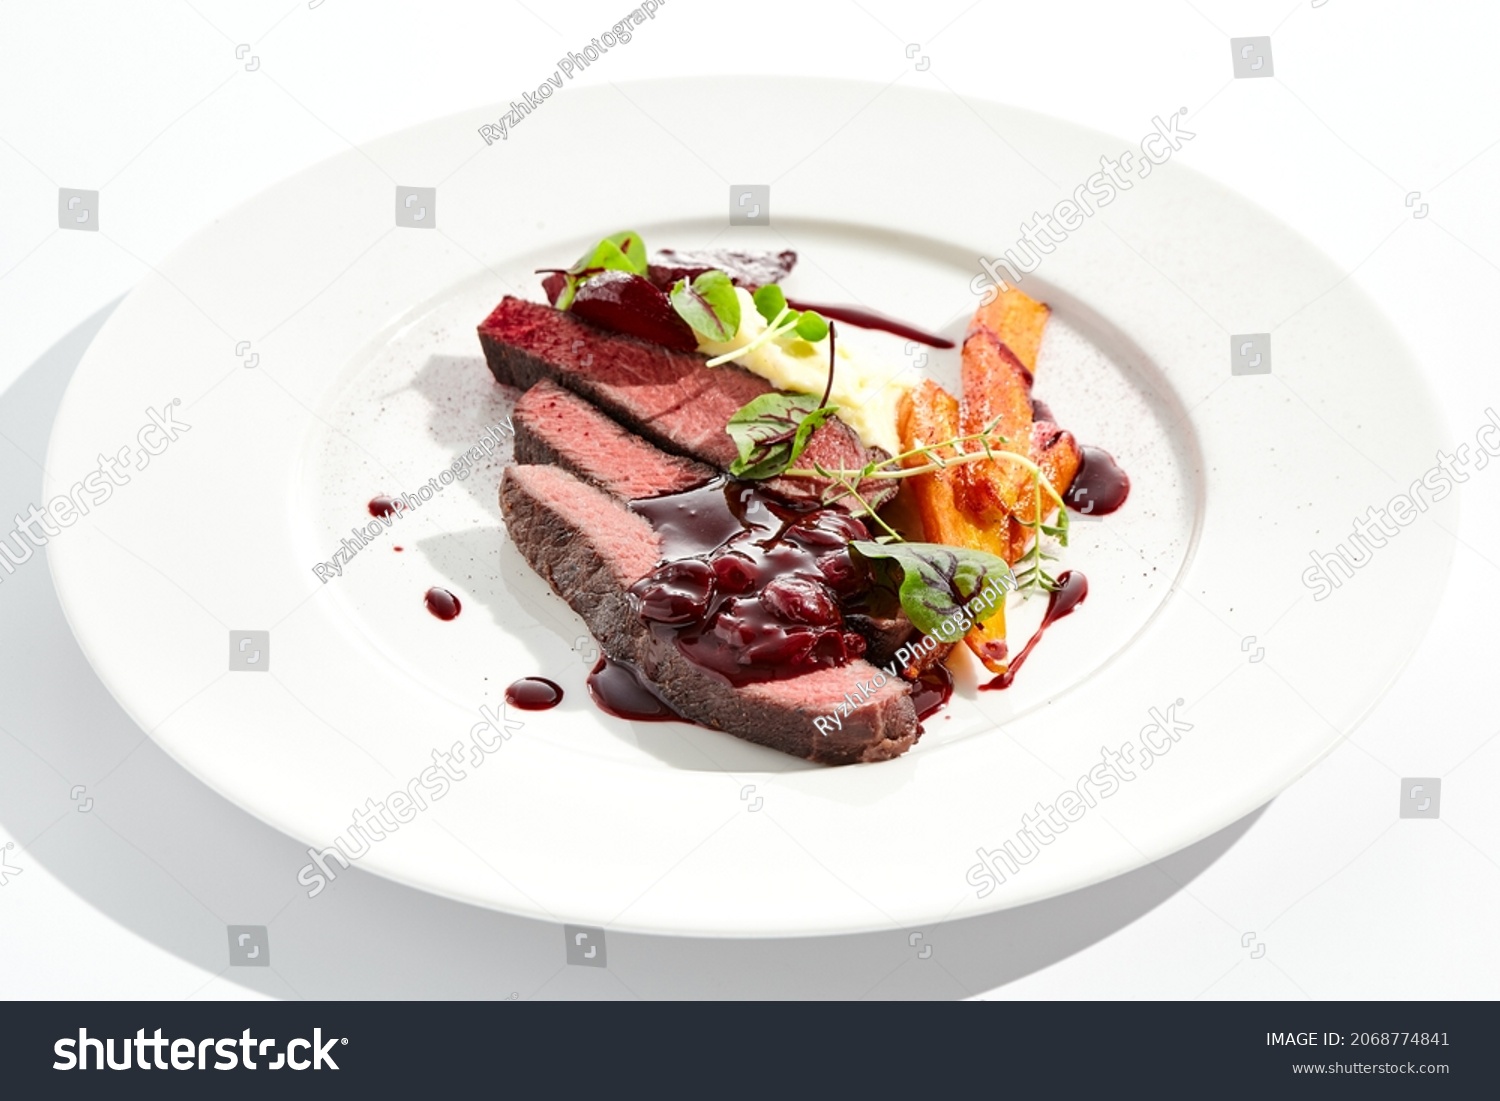 Venison steak with baked vegetables isolated on white plate. Meat steak medium rare roasted with carrot, beetroot and mashed potatoes with cherry sauce. Wild meat in restaurant menu #2068774841